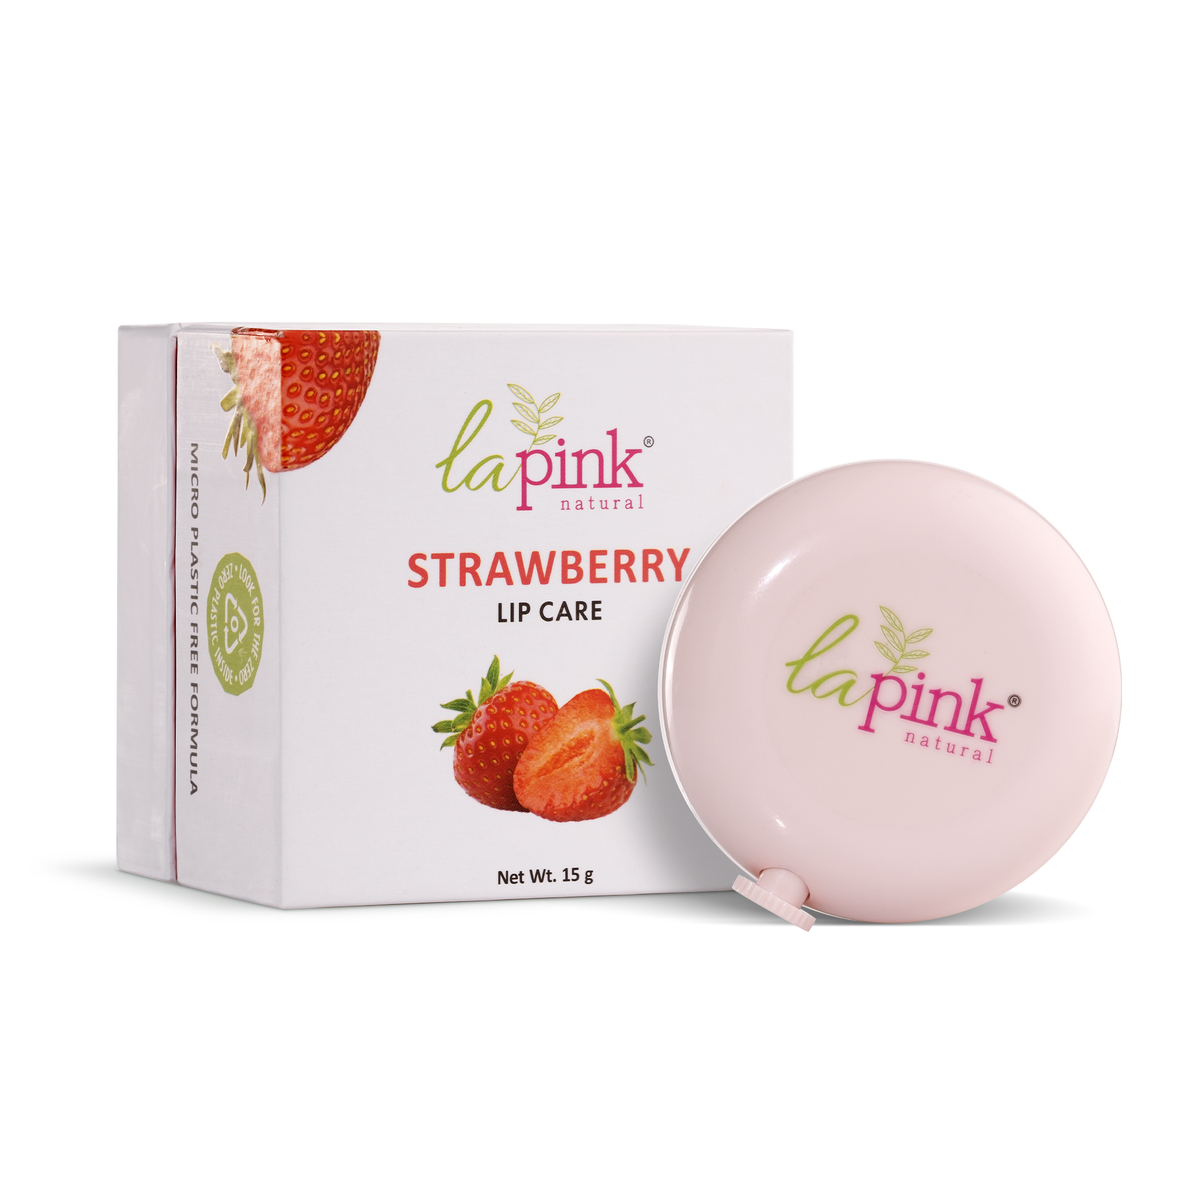 La Pink Strawberry Lip Care with White Haldi for Shiny & Natural Tint  15 gms